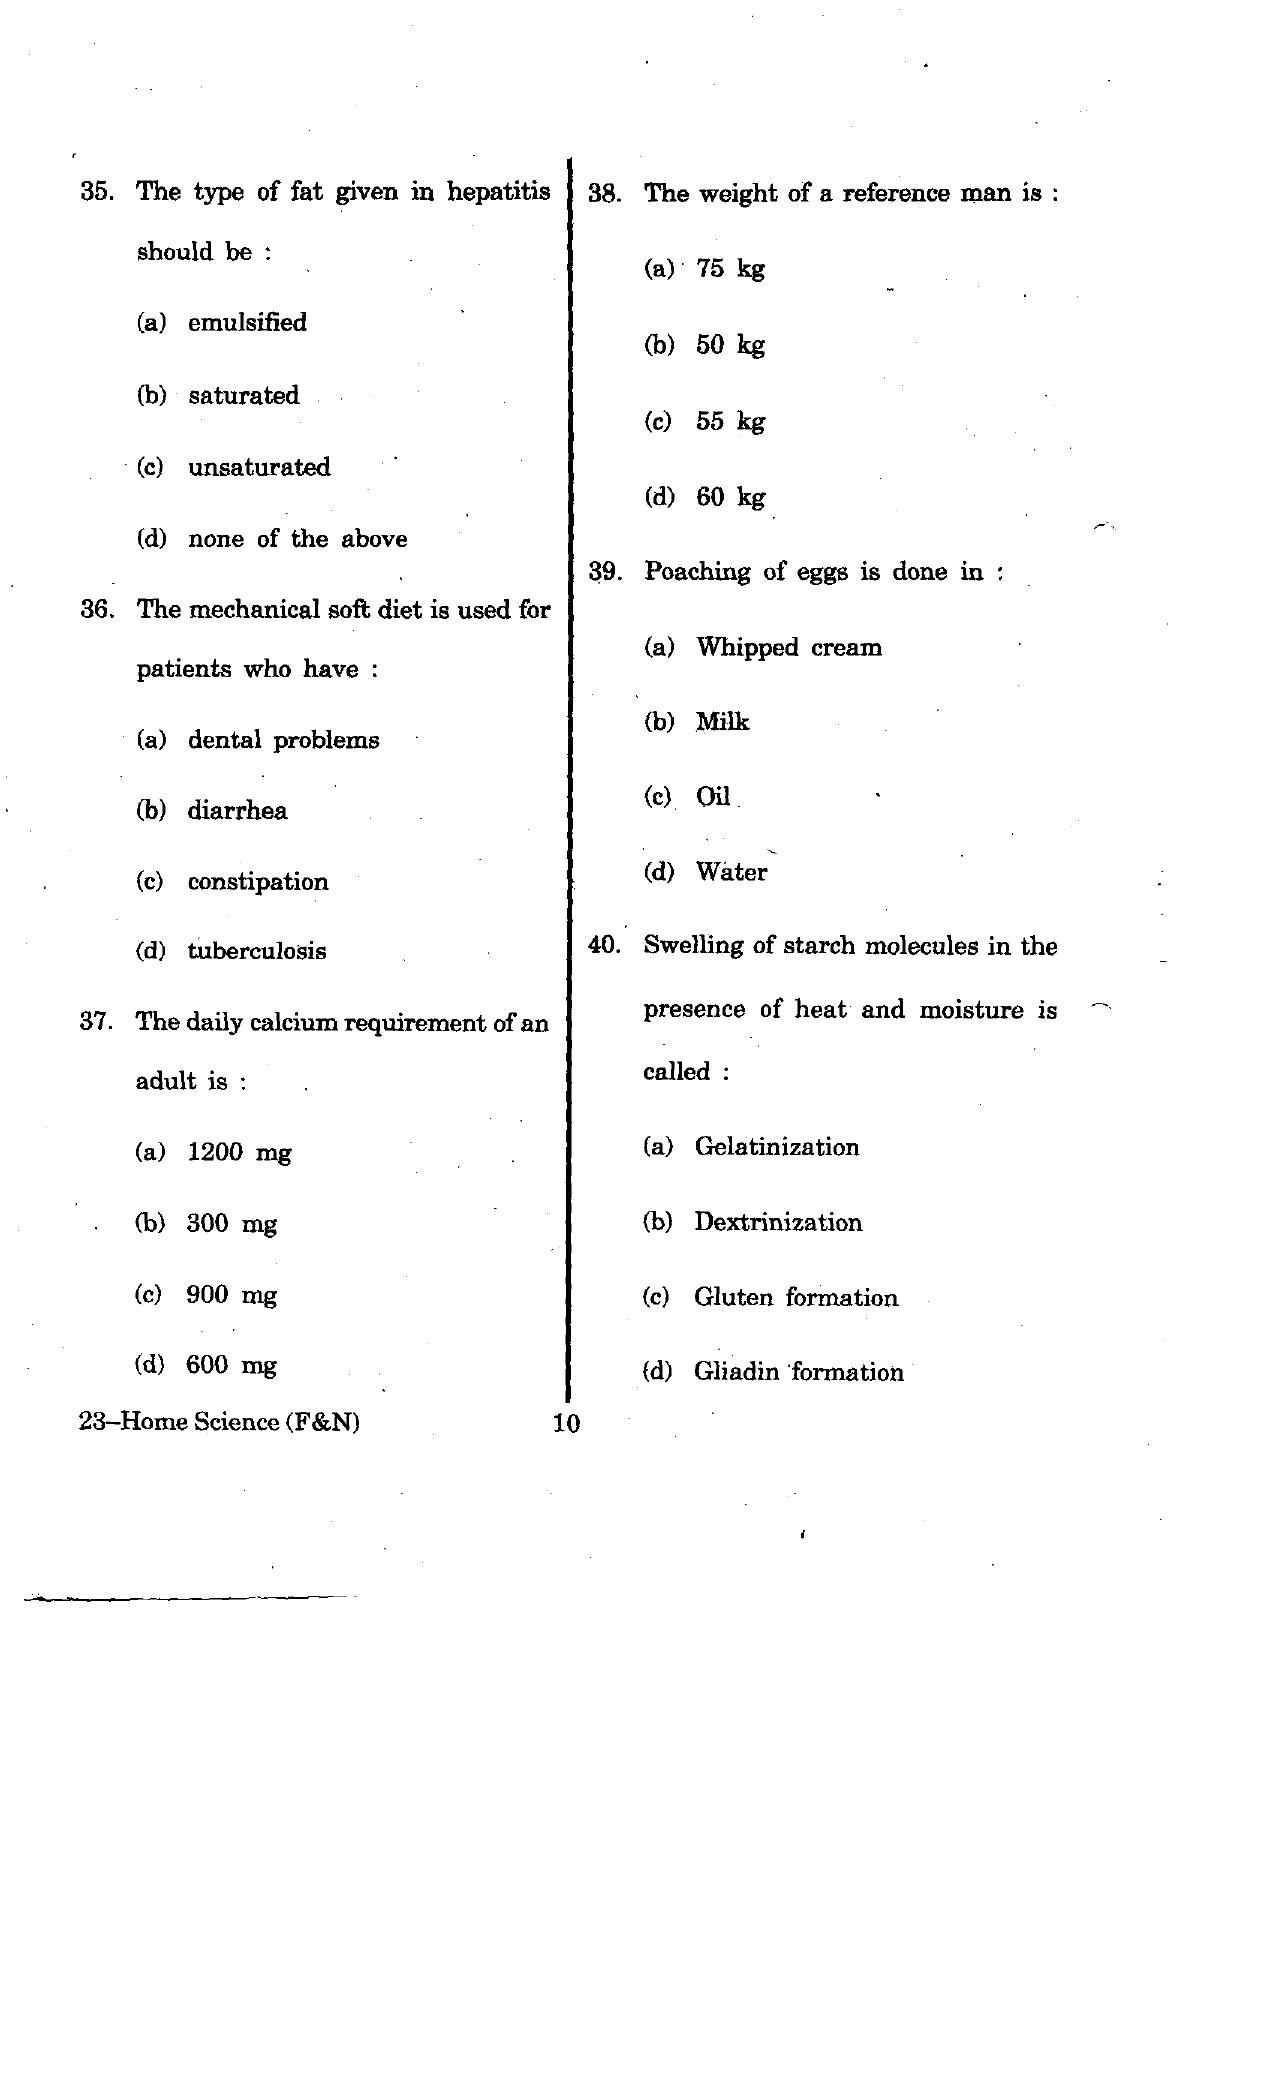 URATPG Home Science(Food & Nut.) 2012 Question Paper - Page 10